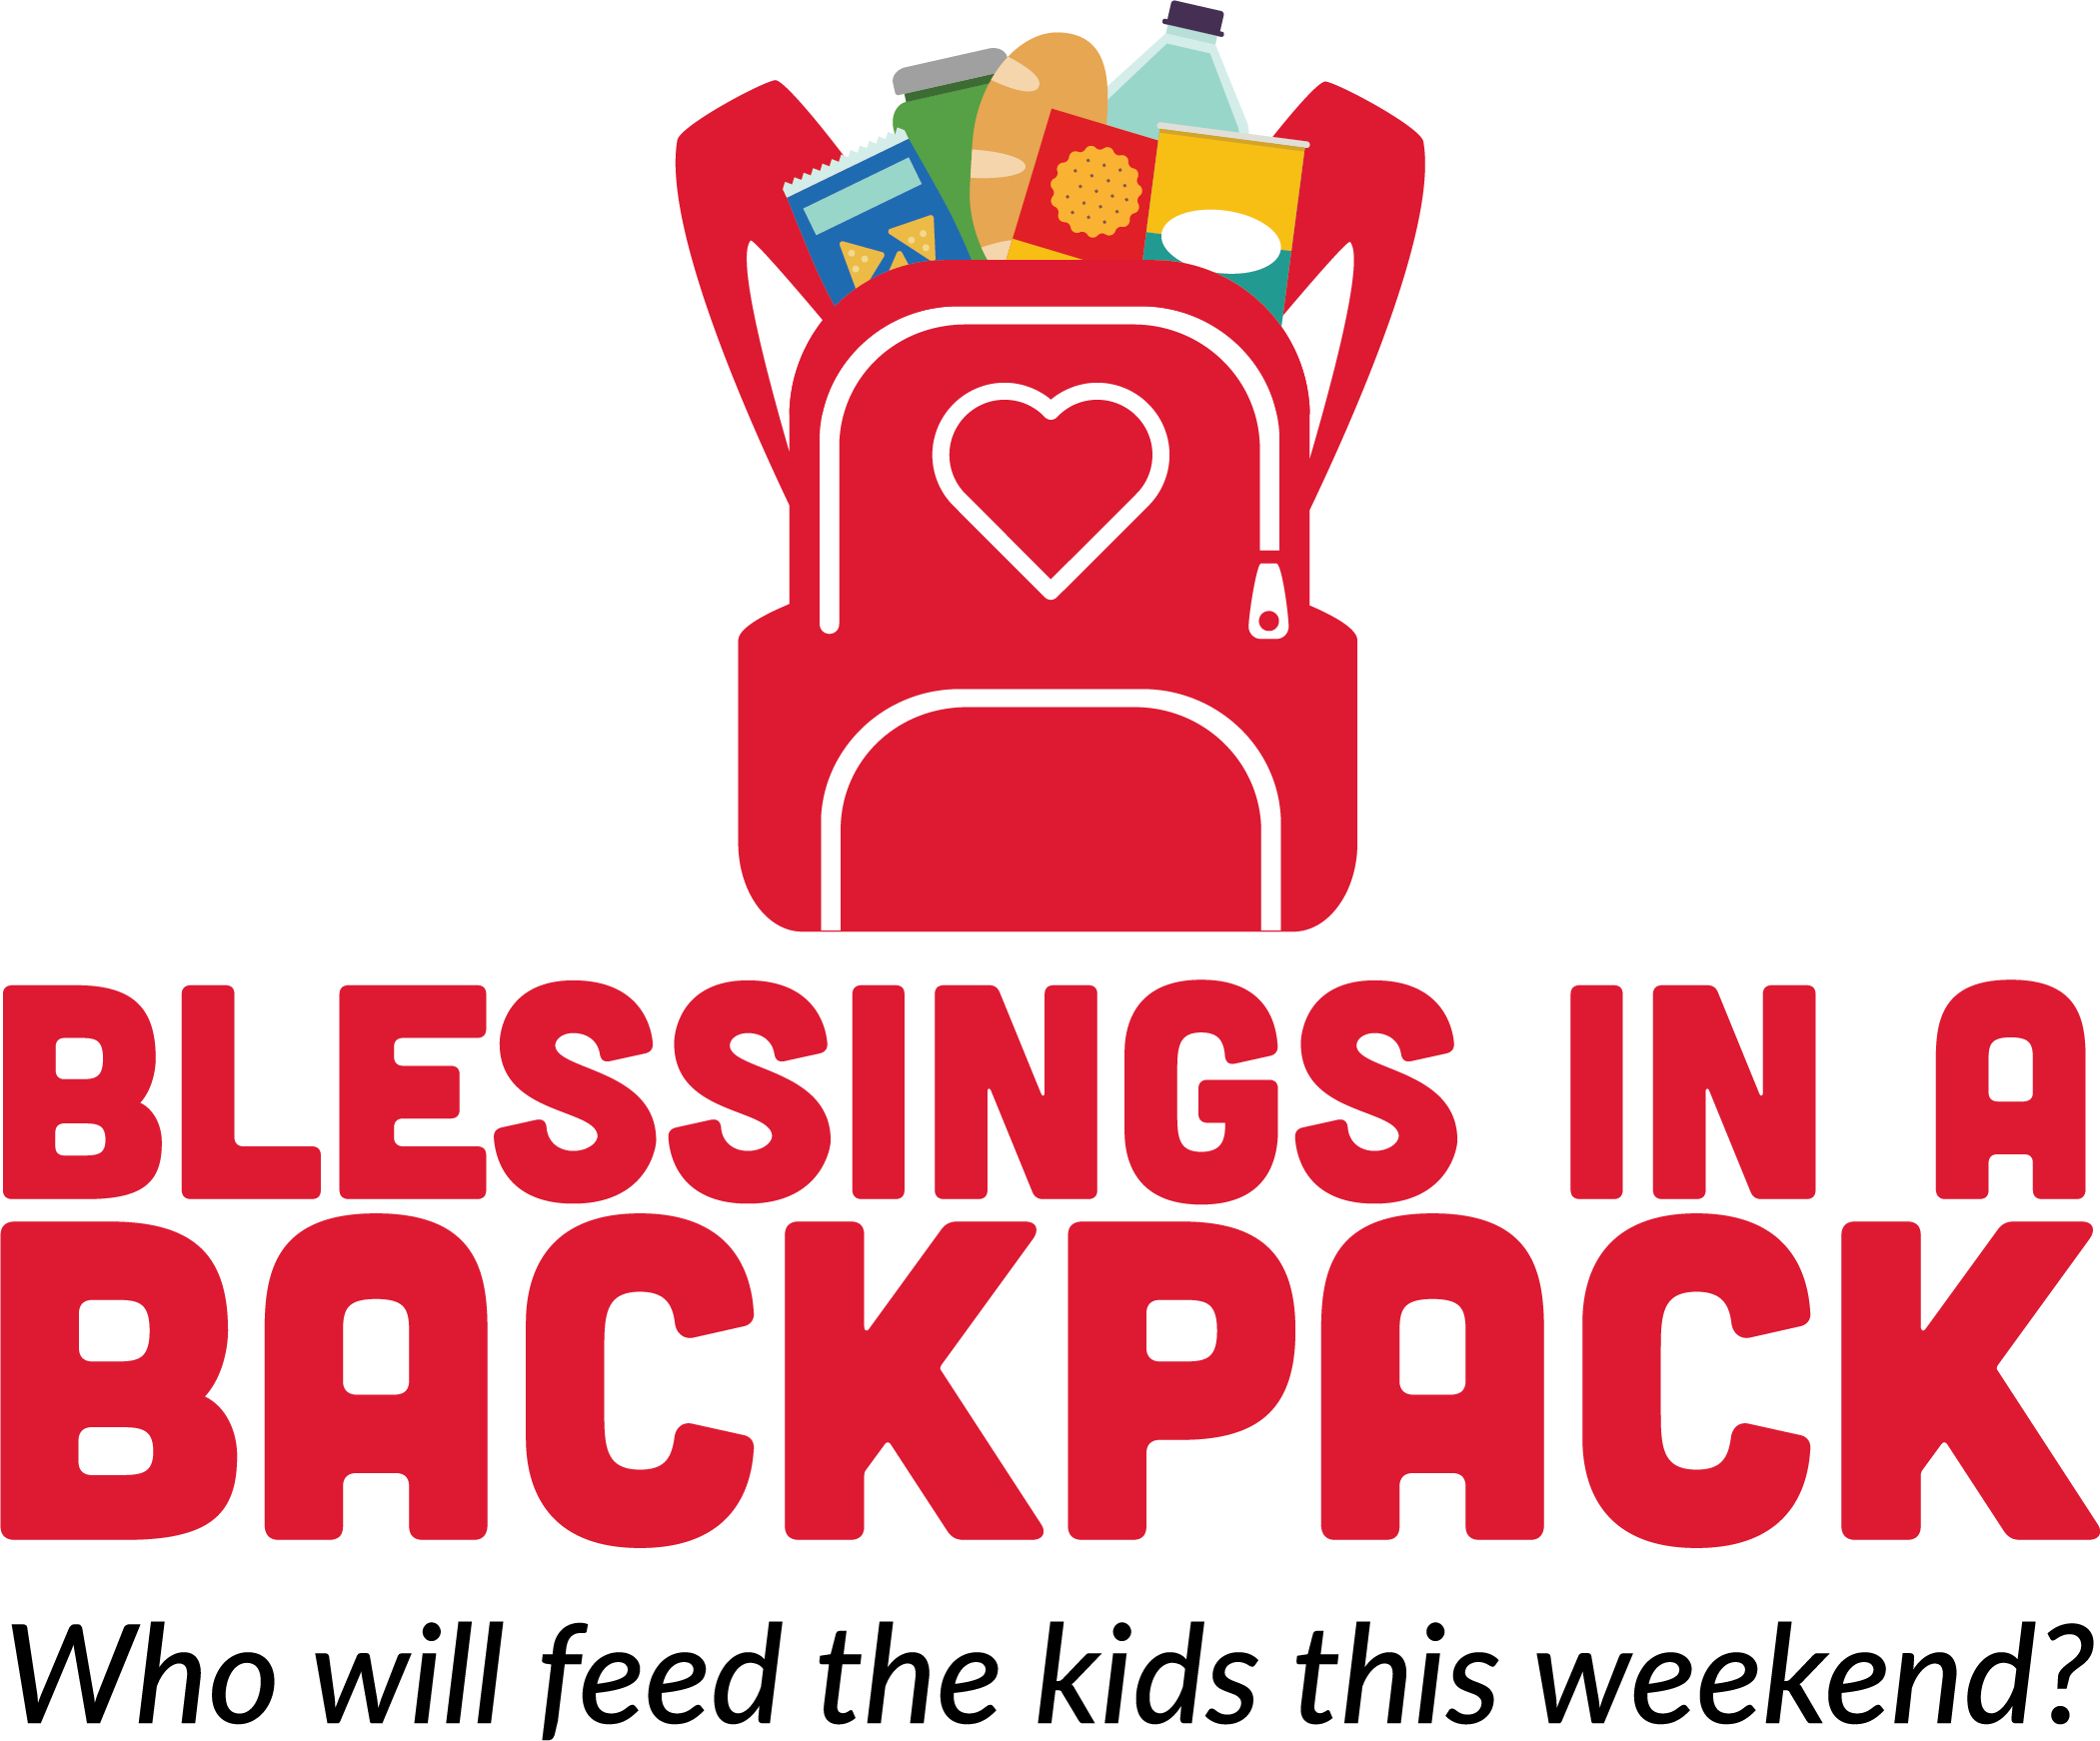 Blessings in a Backpack Louisville Chapter